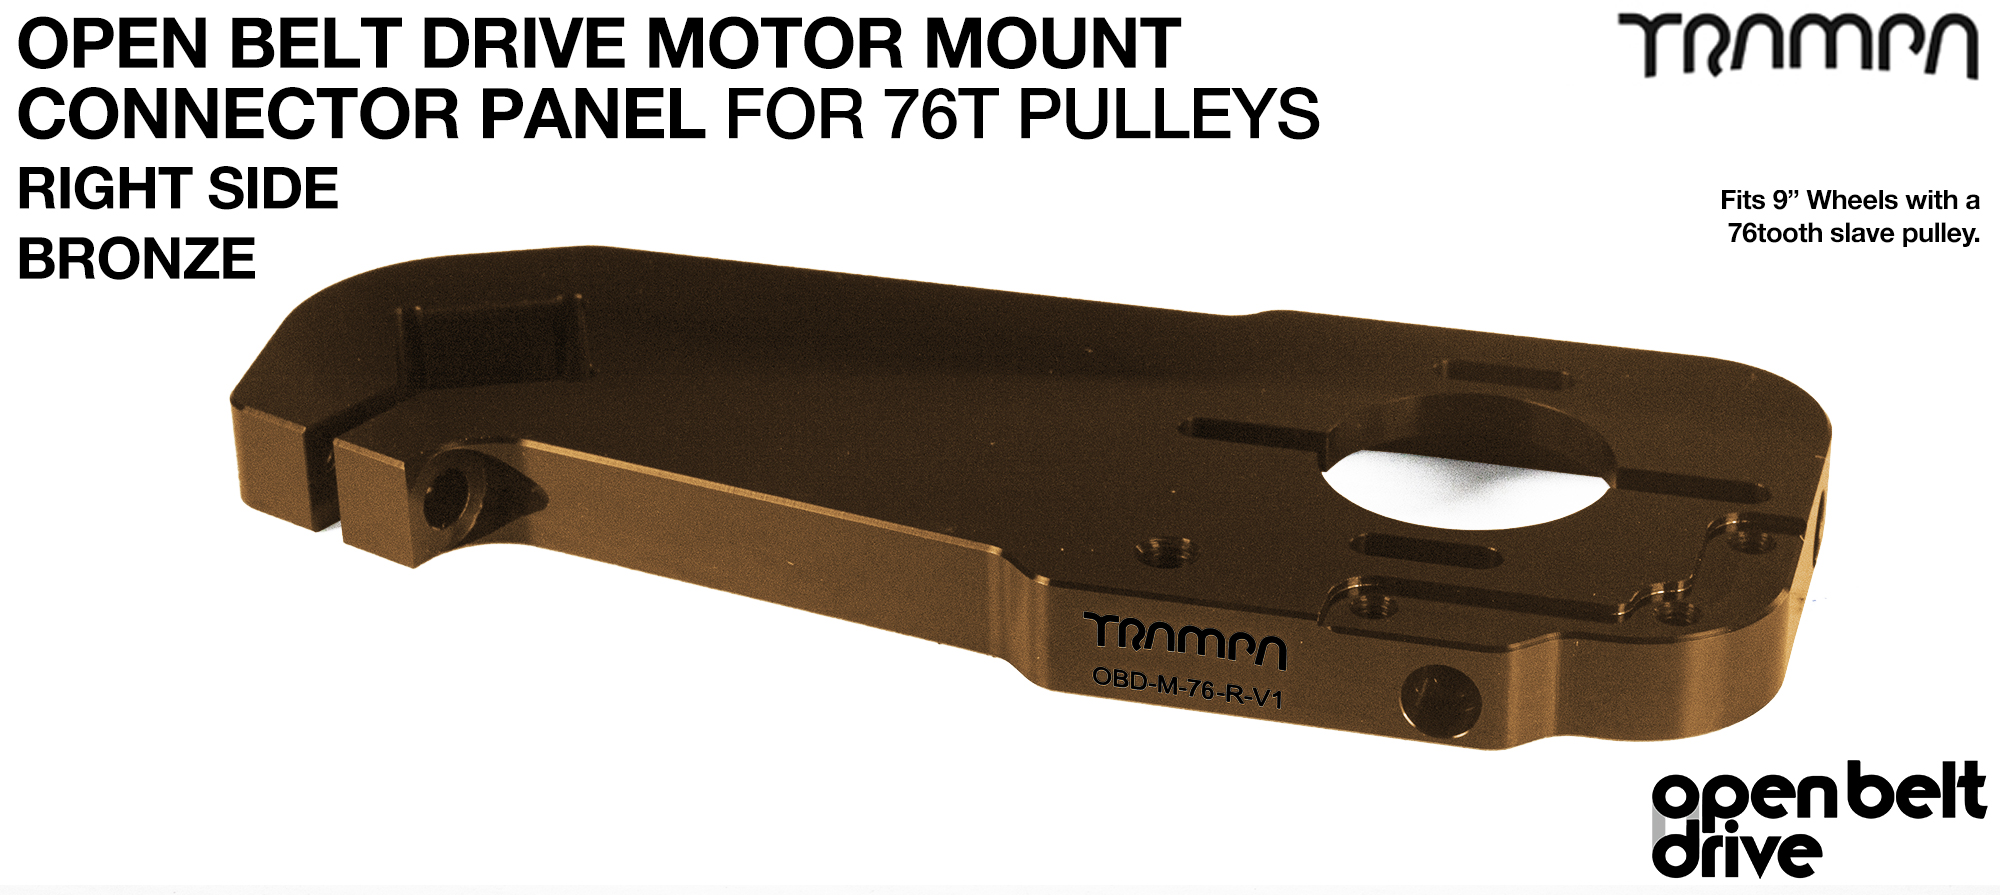 OBD Motor Mount Connector Panel for 76 tooth Pulleys - GOOFY - BRONZE